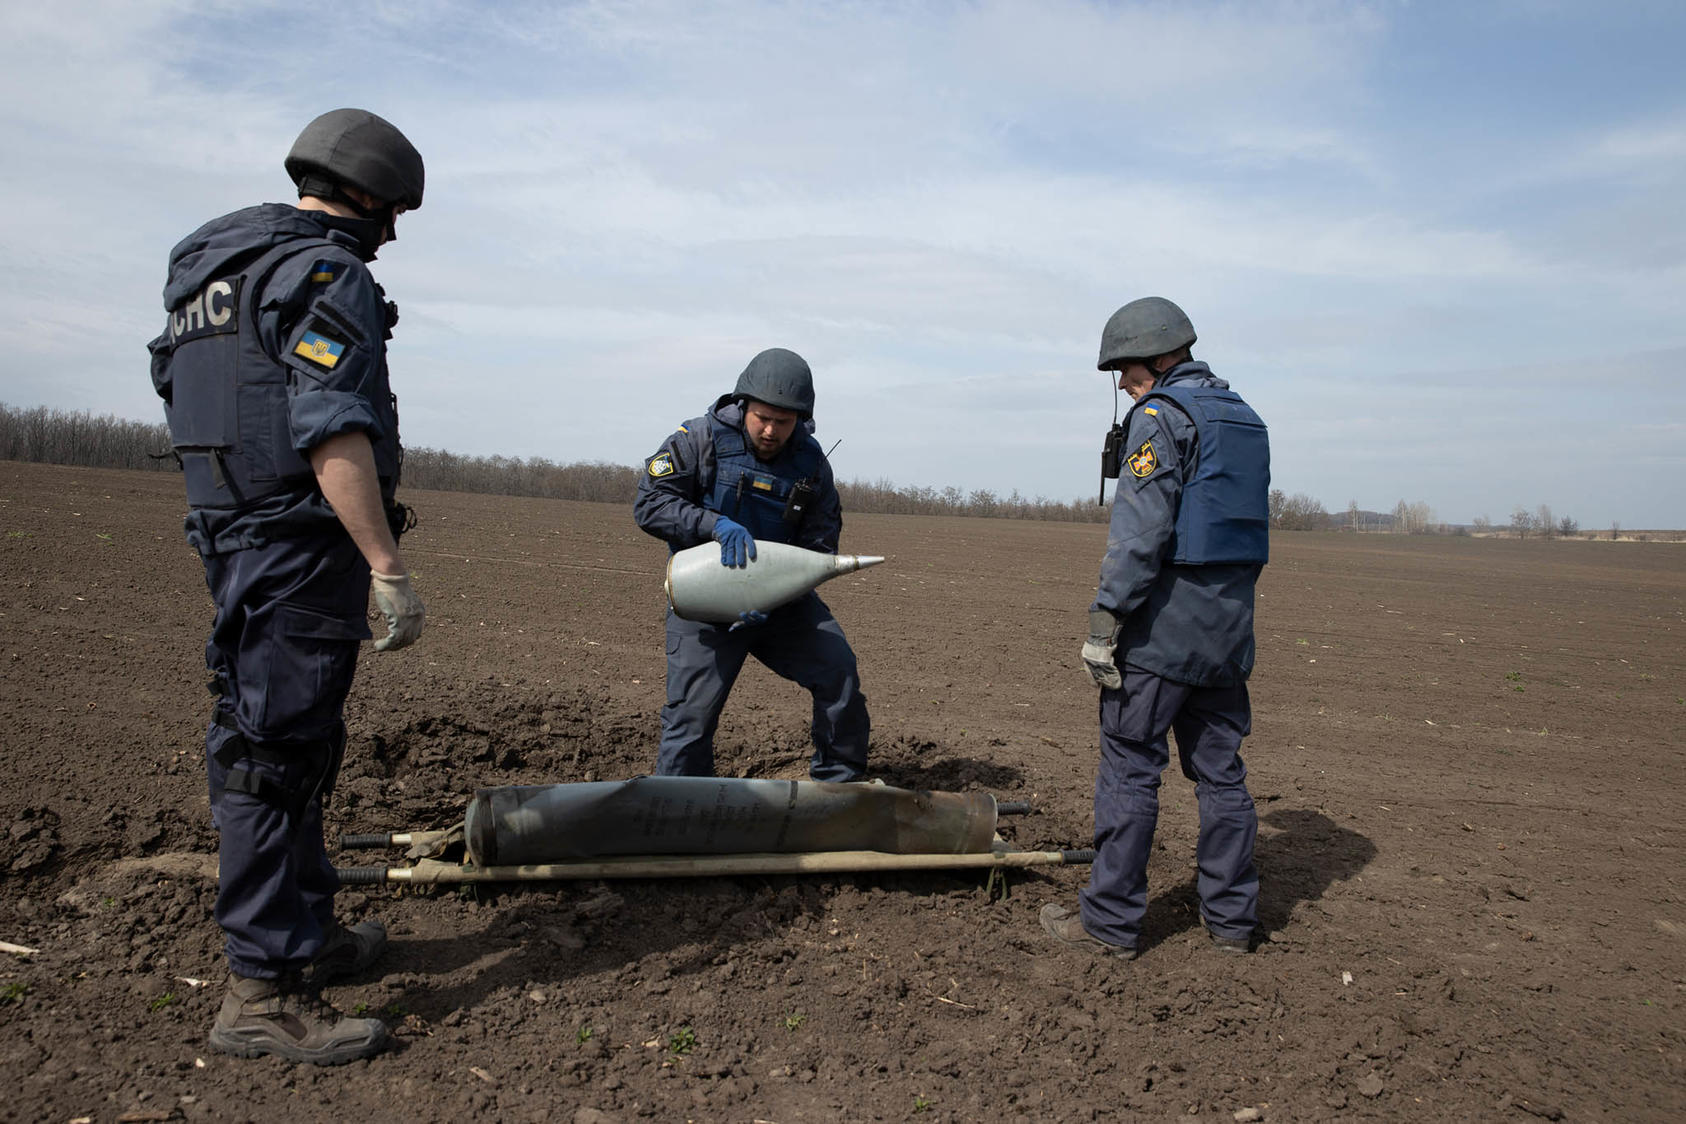 Bomb disposal technicians remove an undetonated rocket loaded with cluster munitions from a field in the village of Ridnyi Krai, Ukraine, April 8, 2022. (Tyler Hicks/The New York Times)